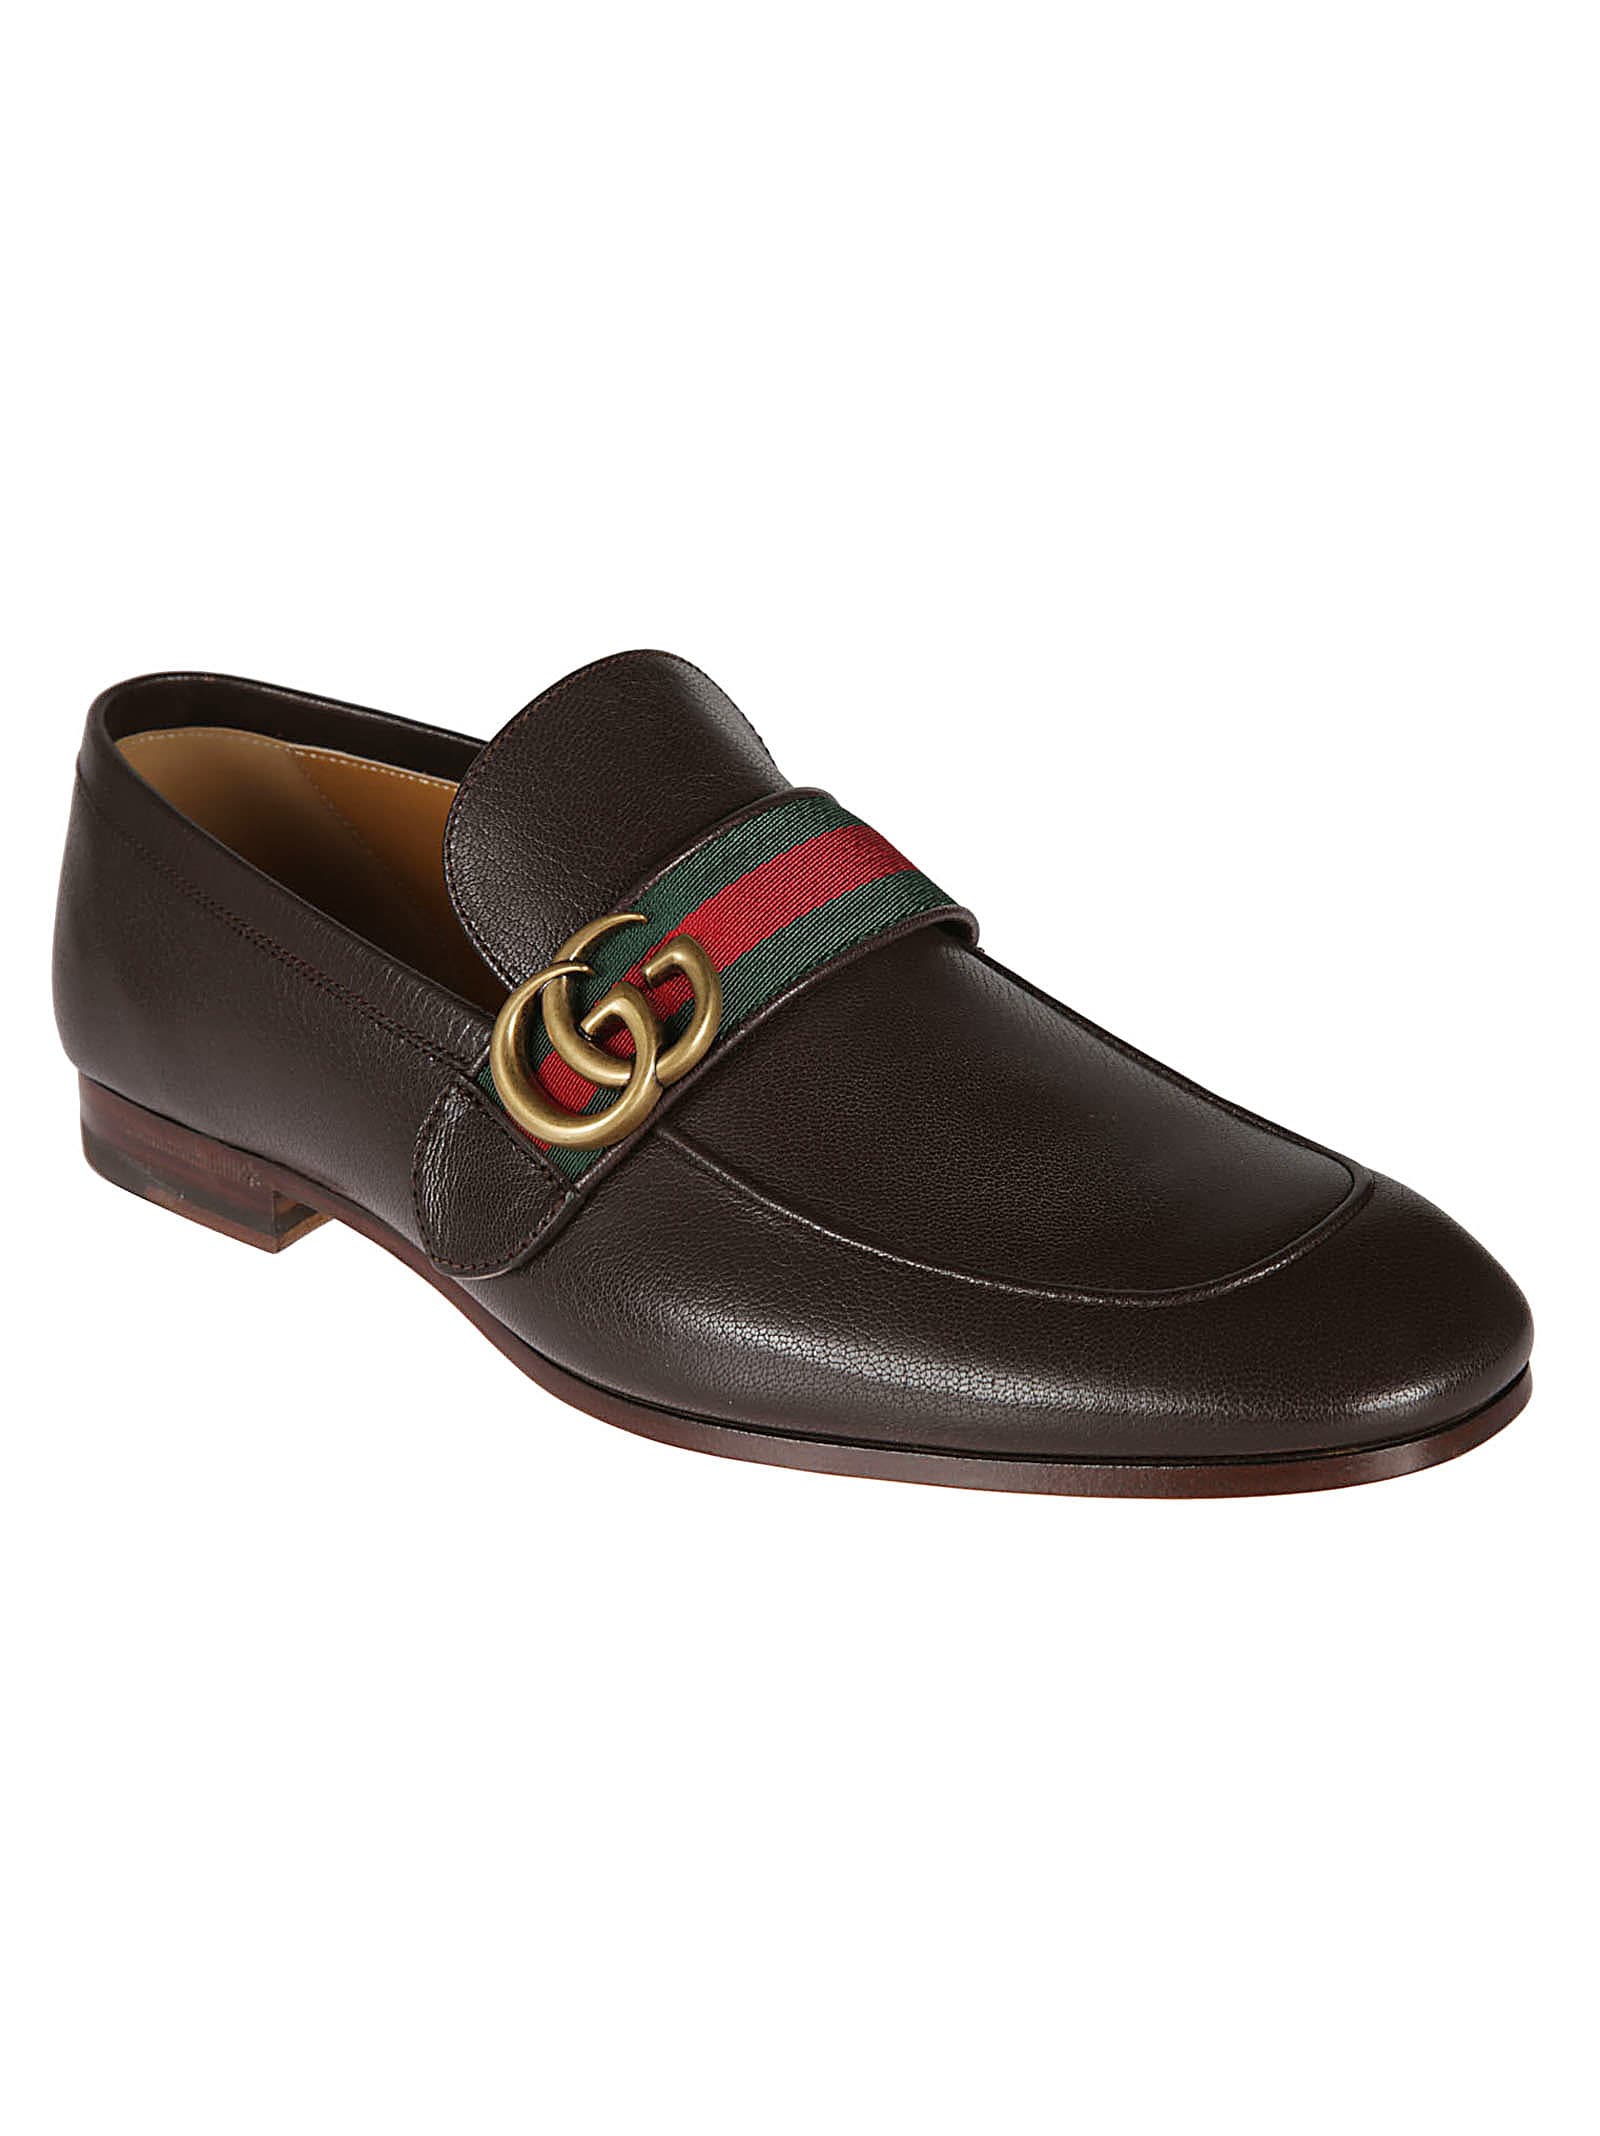 Gucci Loafers \u0026 Boat Shoes | italist 